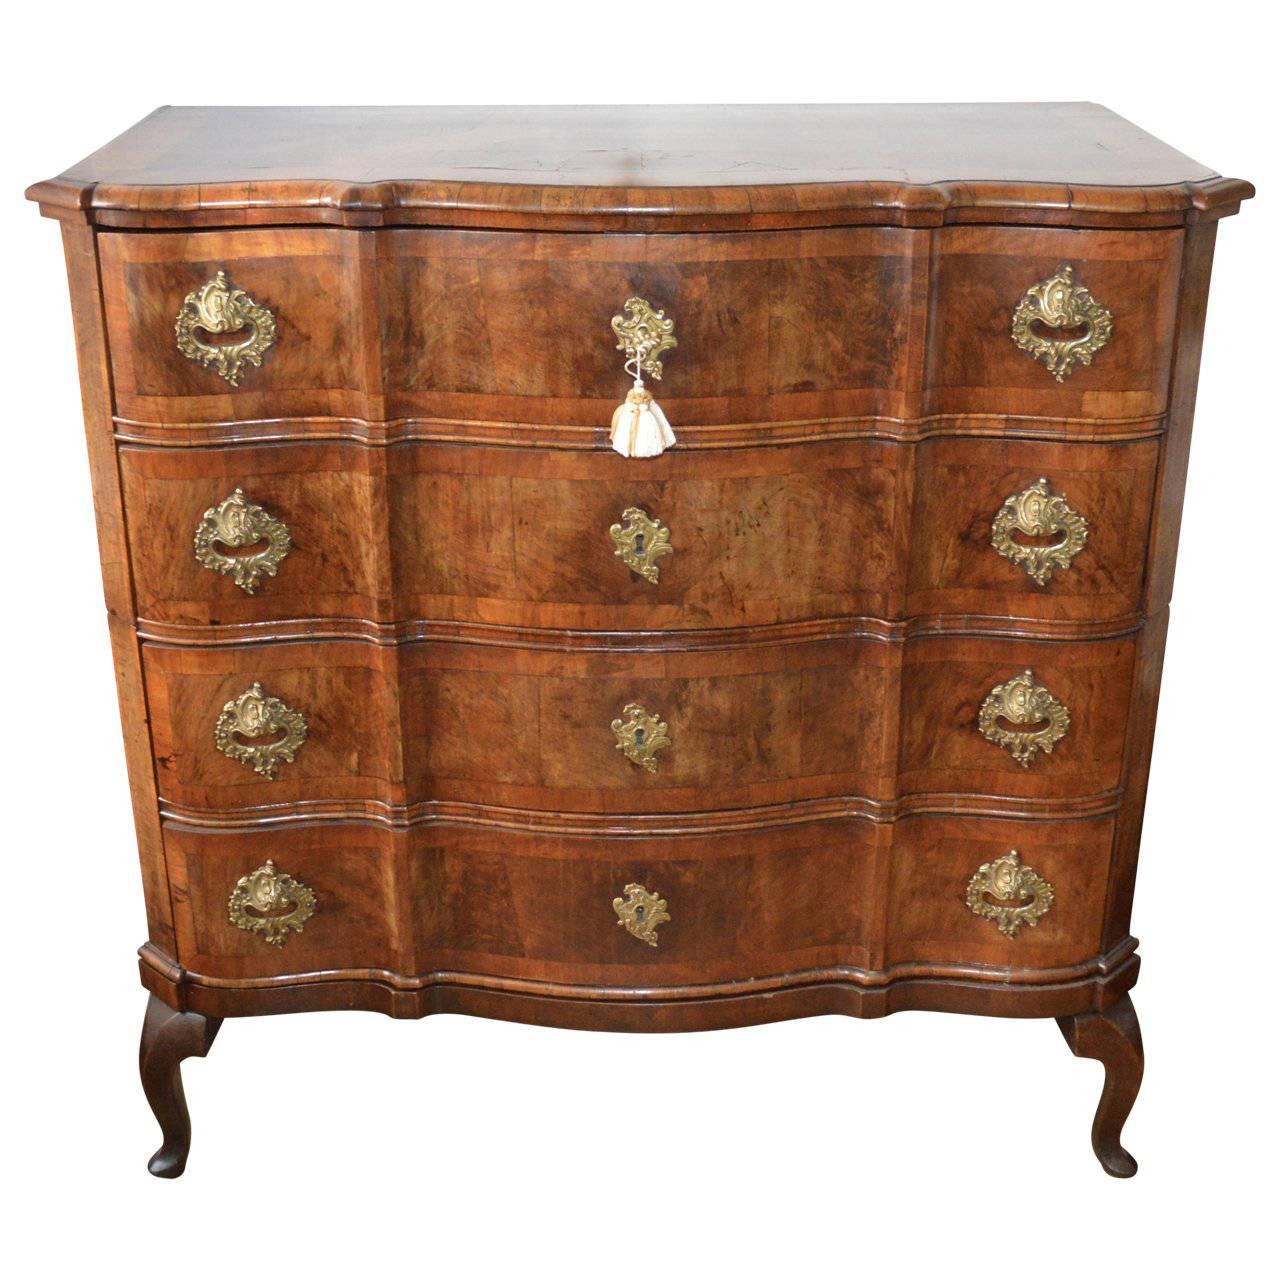 Large Danish 18th Century Mahogany Dresser Or Chest of Drawers For Sale